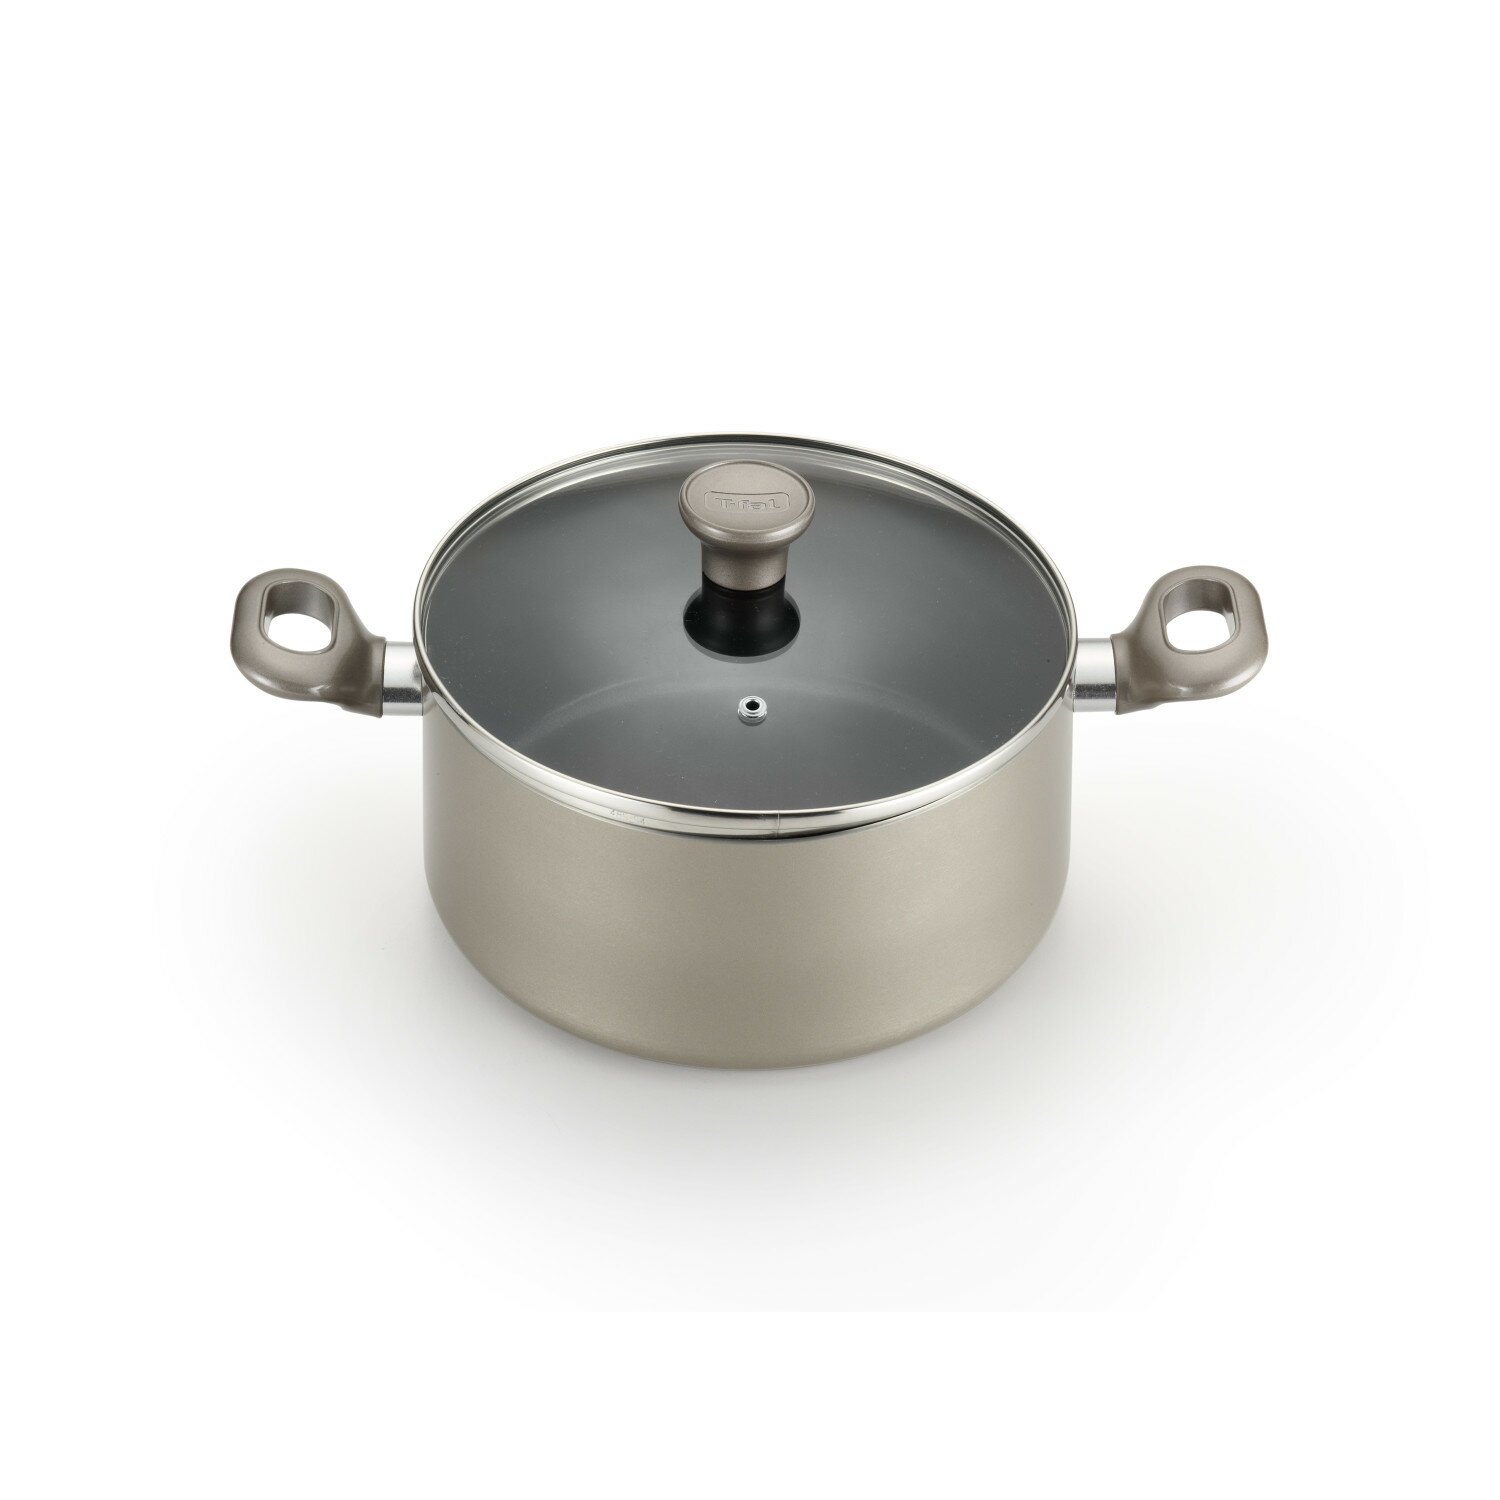 Are reviews for T-Fal cookware generally positive?